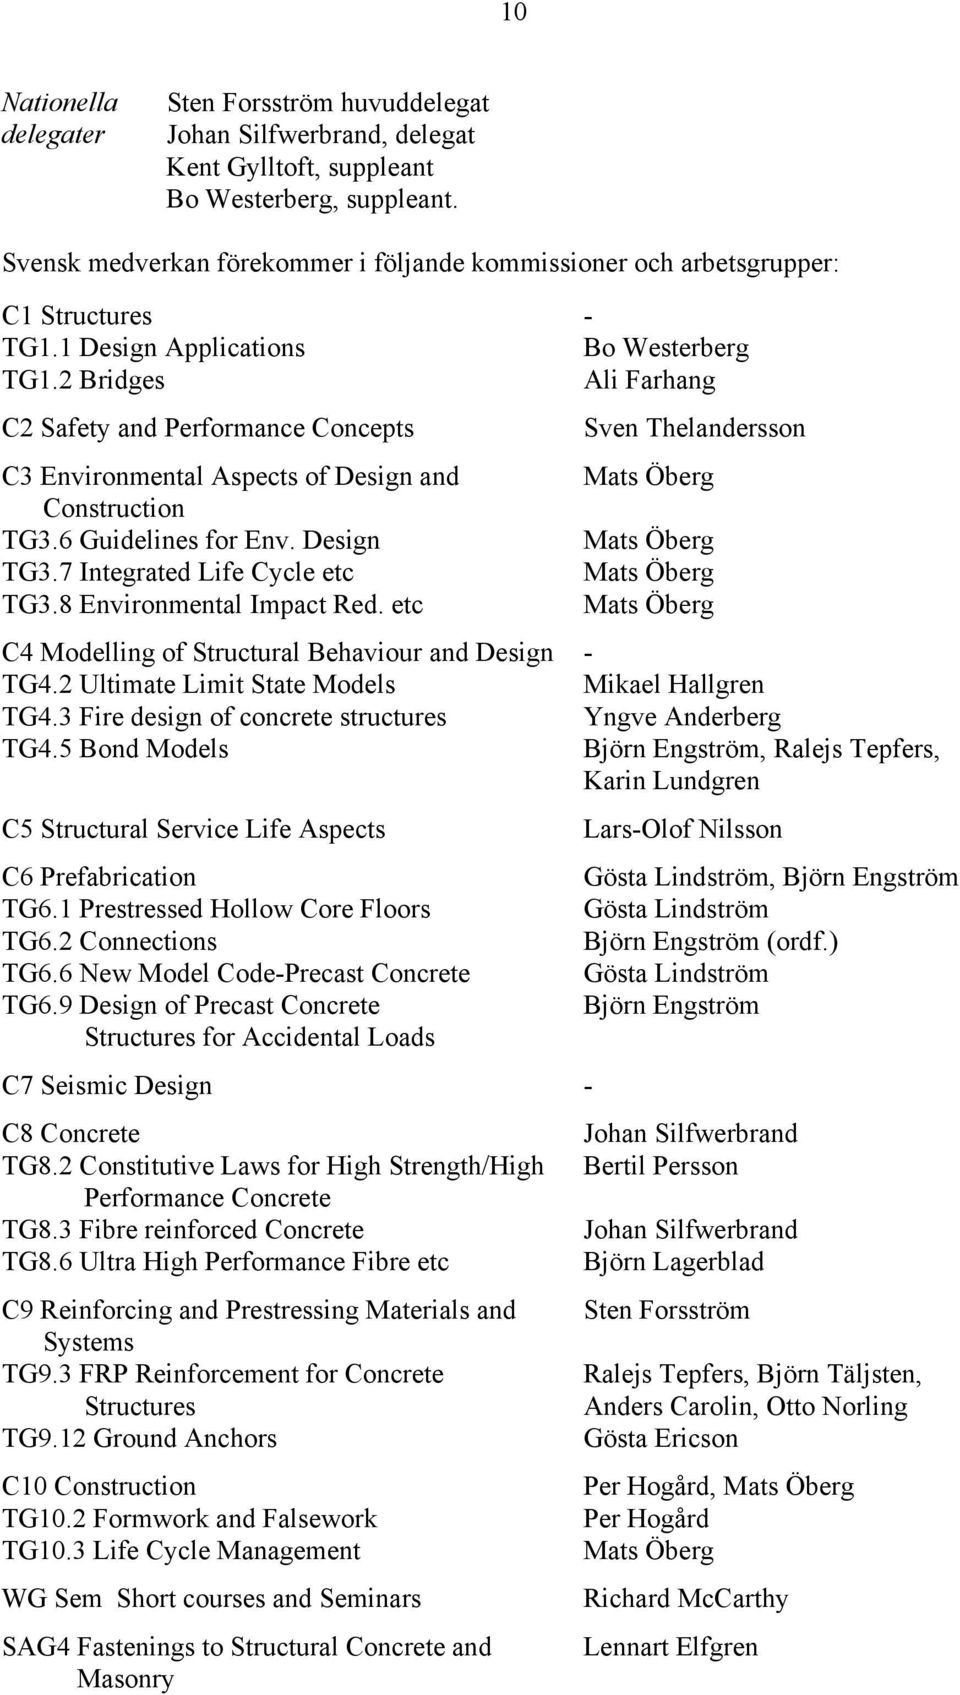 2 Bridges Ali Farhang C2 Safety and Performance Concepts C3 Environmental Aspects of Design and Construction TG3.6 Guidelines for Env. Design TG3.7 Integrated Life Cycle etc TG3.